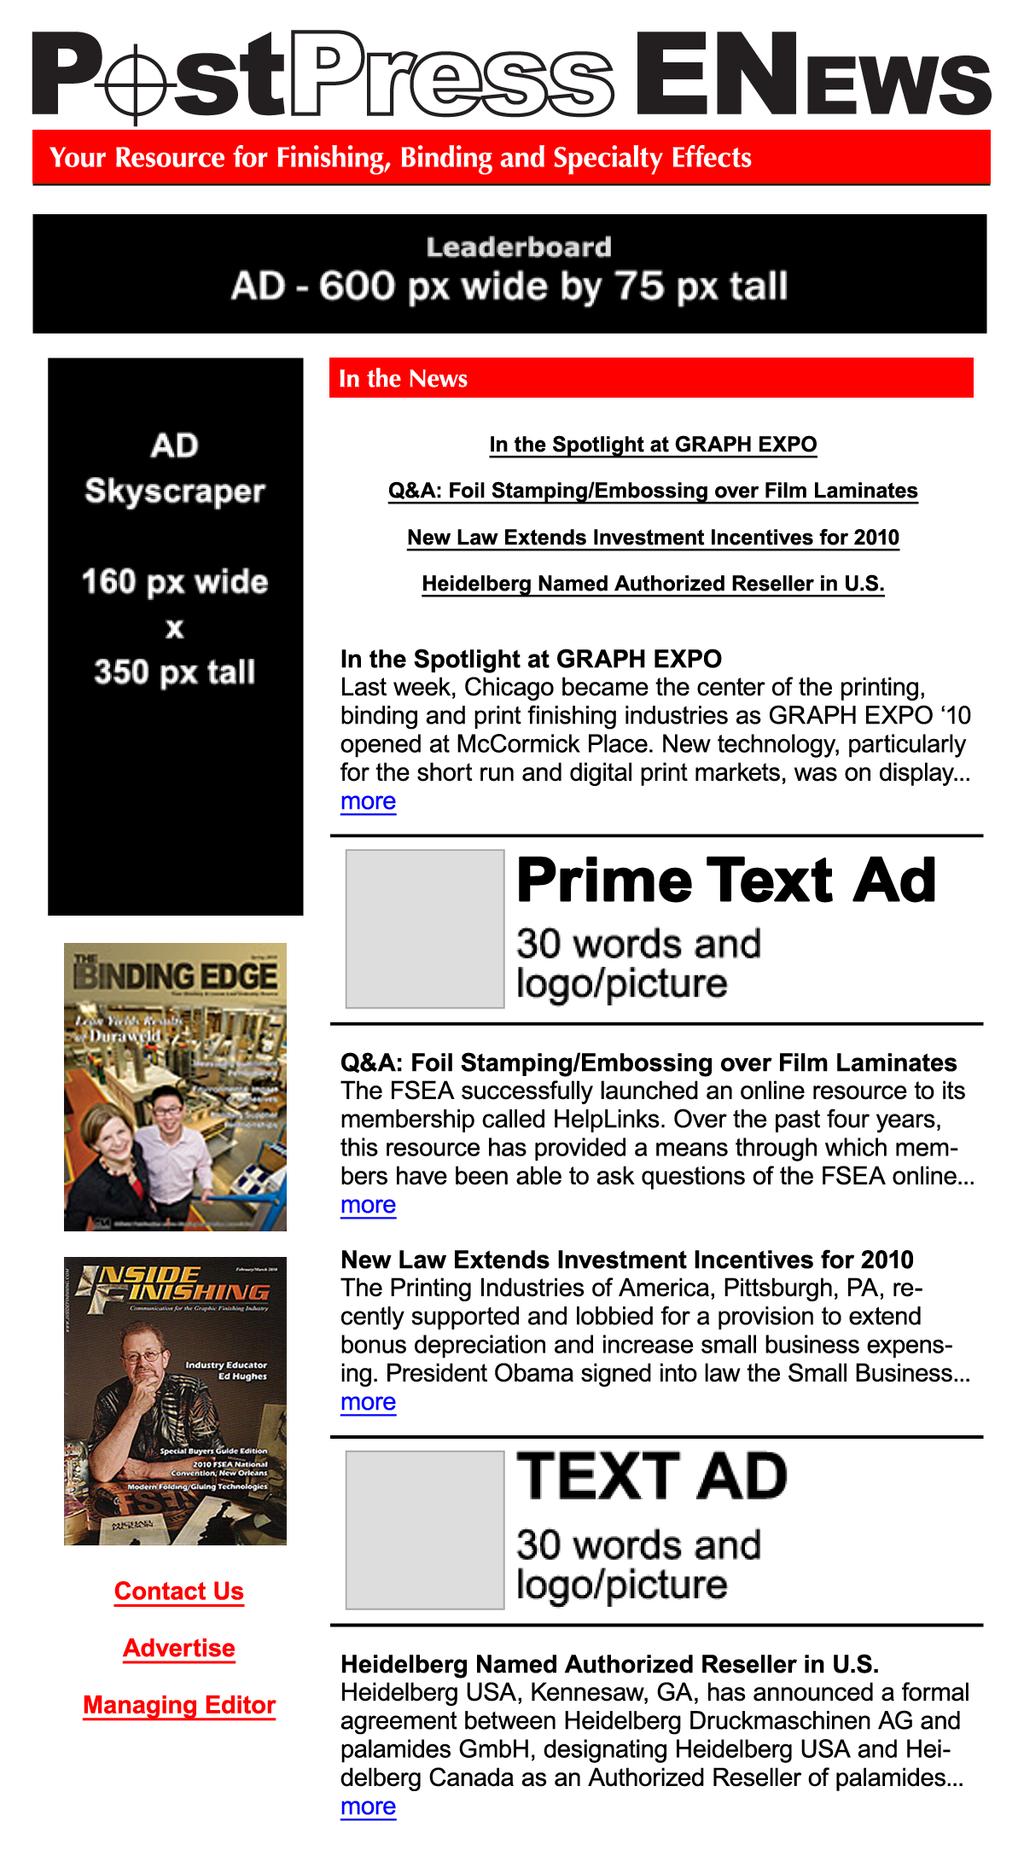 ONLINE ADVERTISING MAXIMUM ONLINE VISIBILITY In addition to InsideFinishing s printed edition, a new enewsletter will be launched in 2011 entitled PostPress ENews that will offer additional